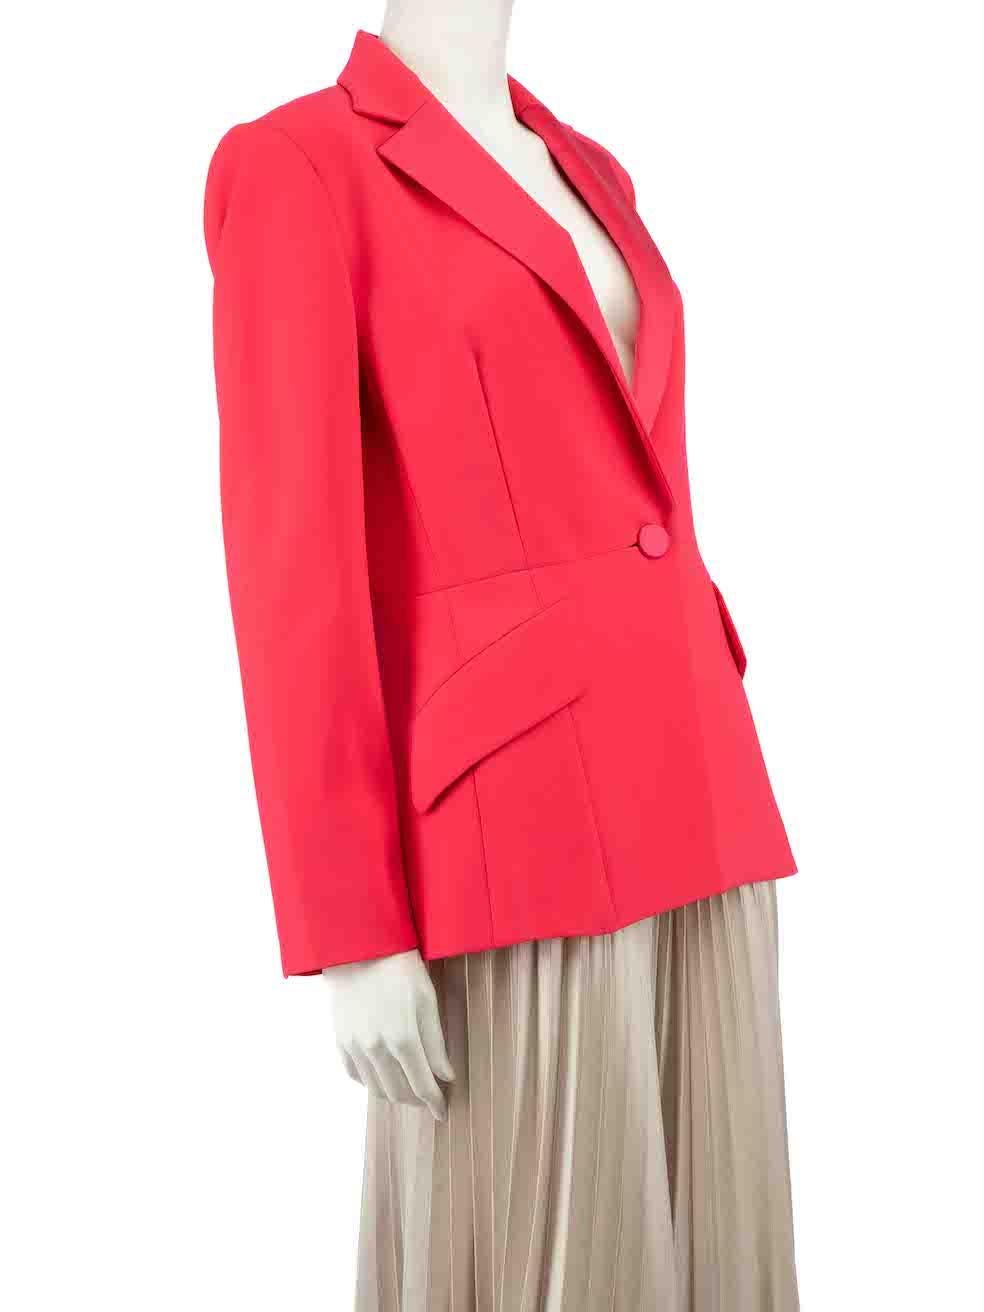 CONDITION is Never worn, with tags. No visible wear to blazer is evident on this new Carolina Herrera designer resale item.
 
 
 
 Details
 
 
 Neon pink
 
 Polyester
 
 Tailored blazer
 
 Silk lapel
 
 Shoulder padded
 
 Single breasted
 
 Button